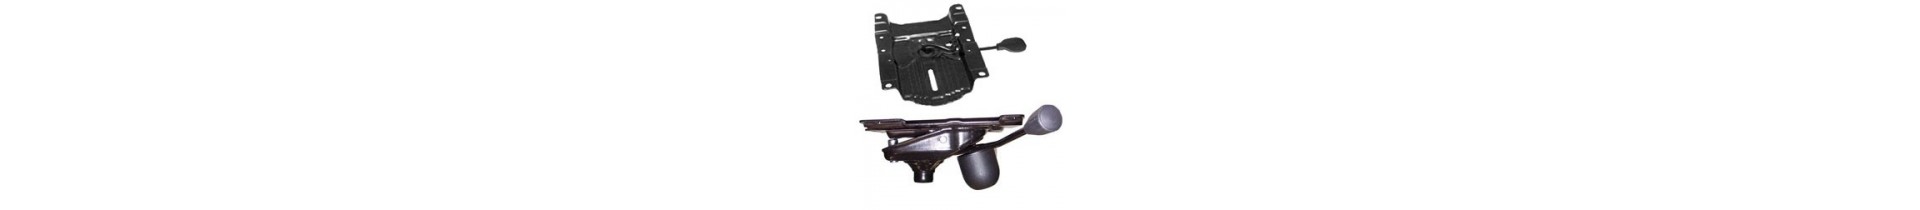 Mechanisms for office chairs